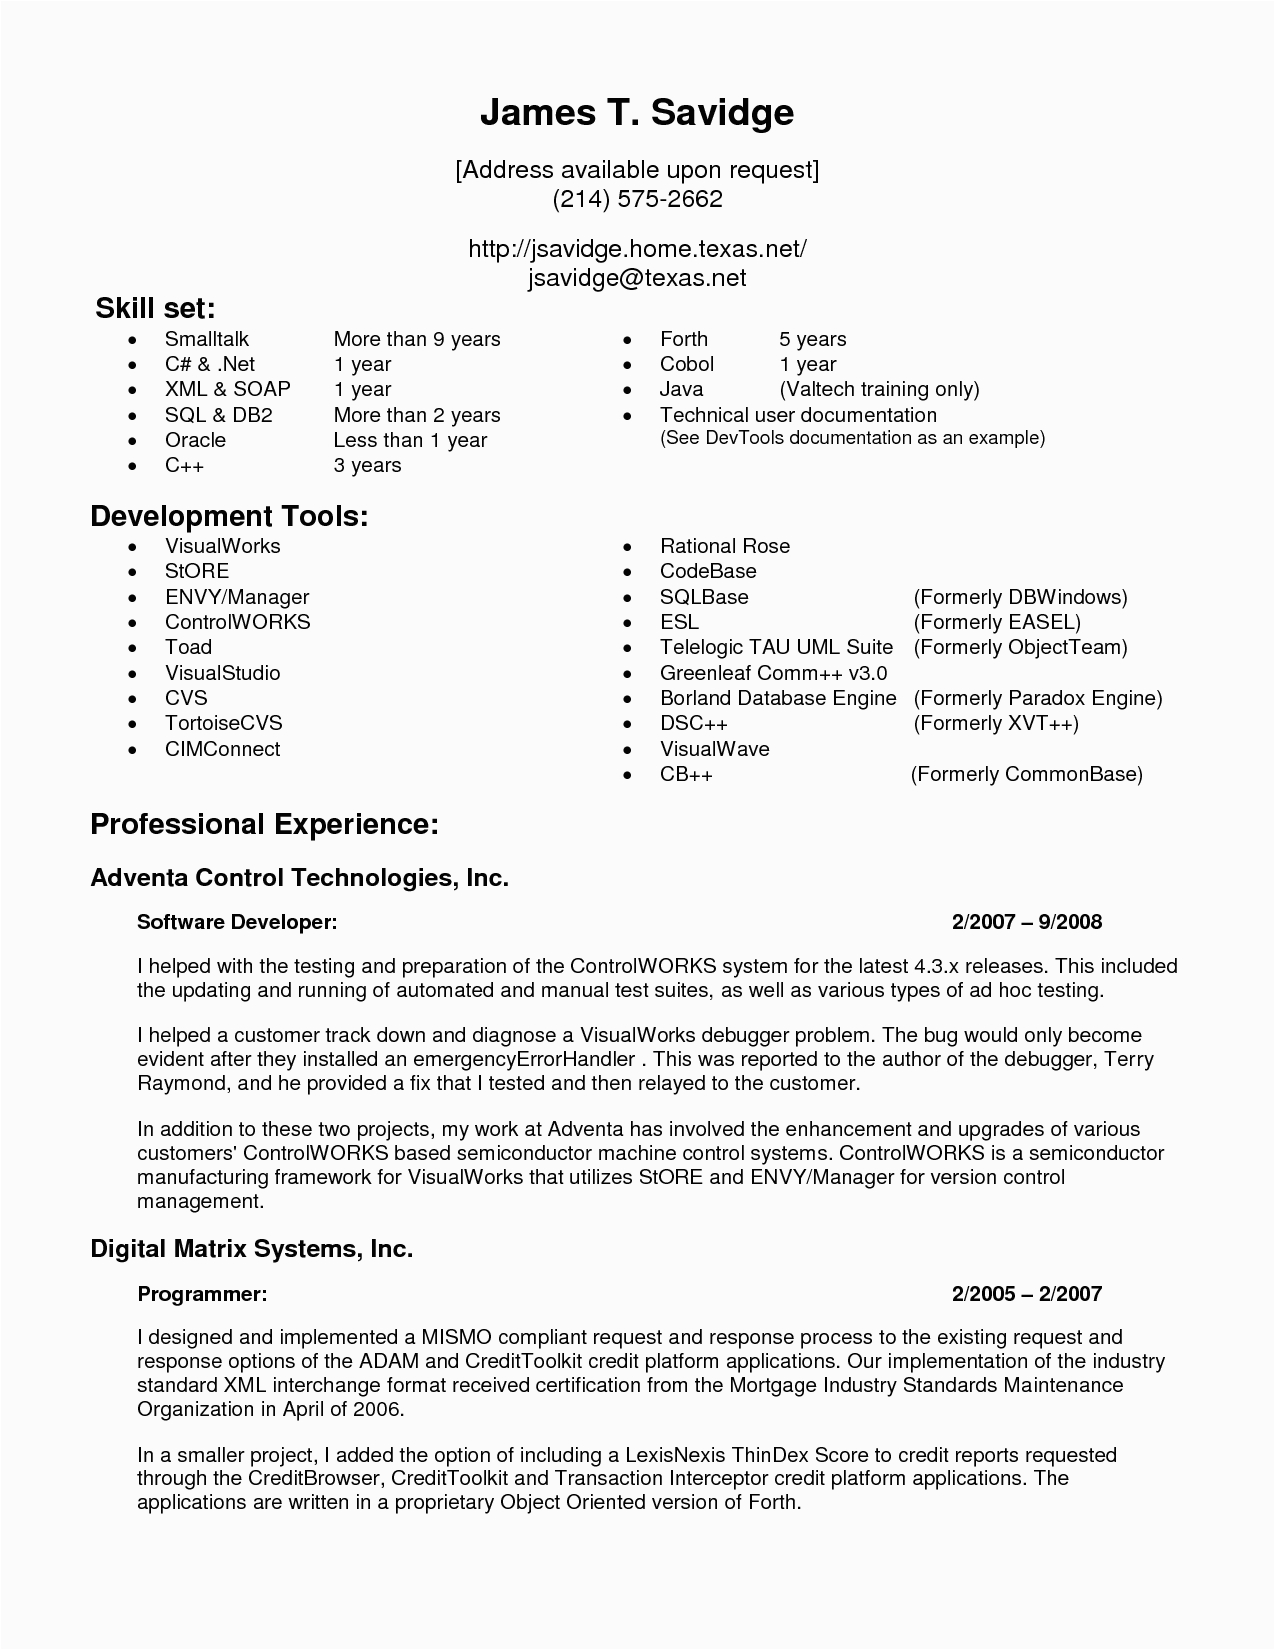 Sample Resume W Experience is One Job for 14 Years top Rated Manual Testing Resume Sample for 1 Year Experience Addictips